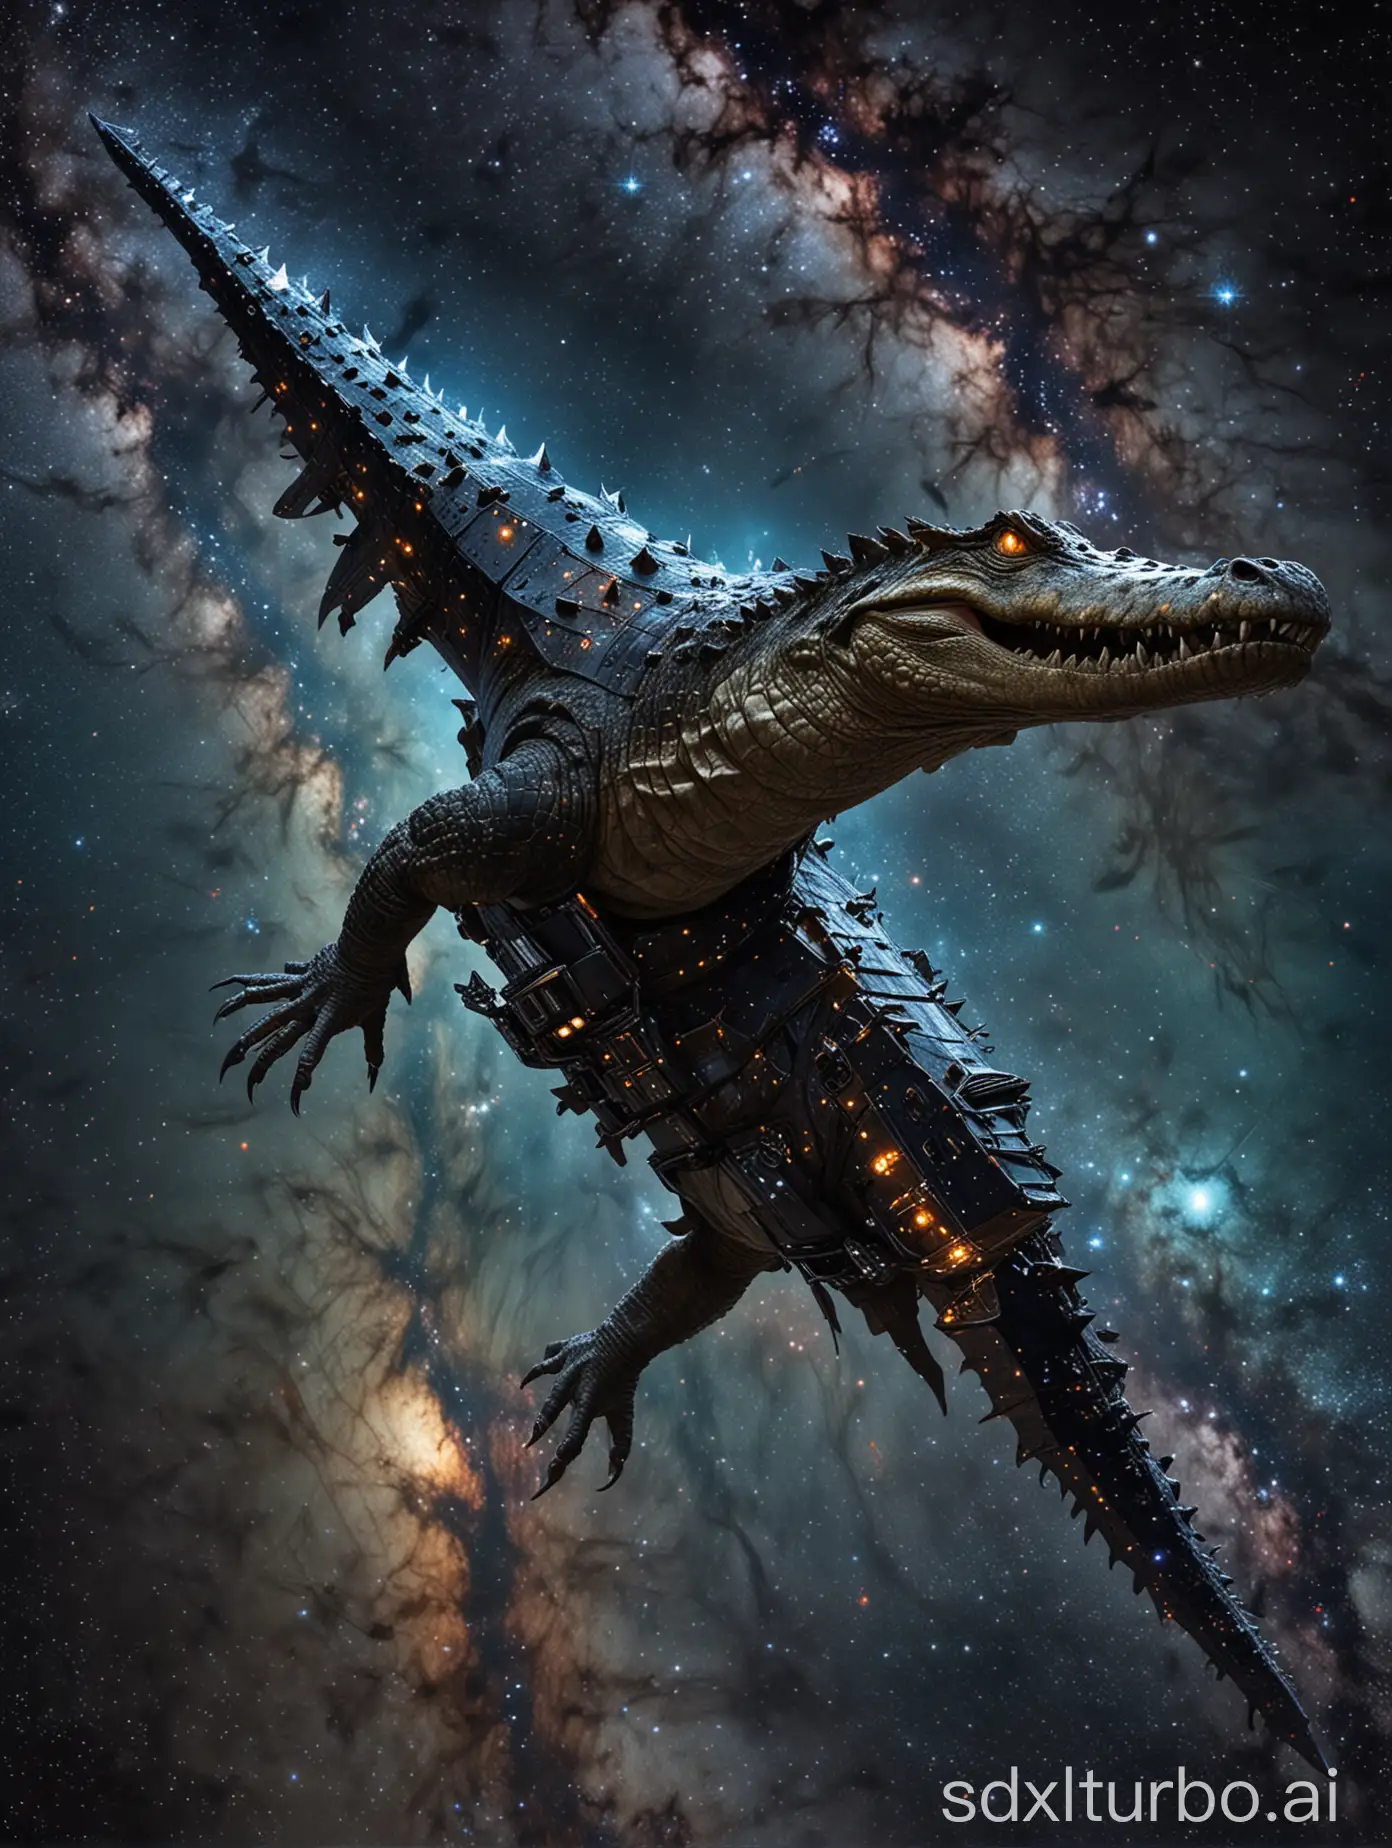 Imagine a giant crocodile wandering leisurely among the stars in the vastness of the universe. Its scales shone with starlight, as if wearing a layer of galactic armor. Its eyes are like two bright stars, revealing a hint of mystery. Its tail swings through space, as if maneuvering the surrounding nebulae and planets. This outer space crocodile is a space pirate's mount and explores the unknown sea of stars with its owner.